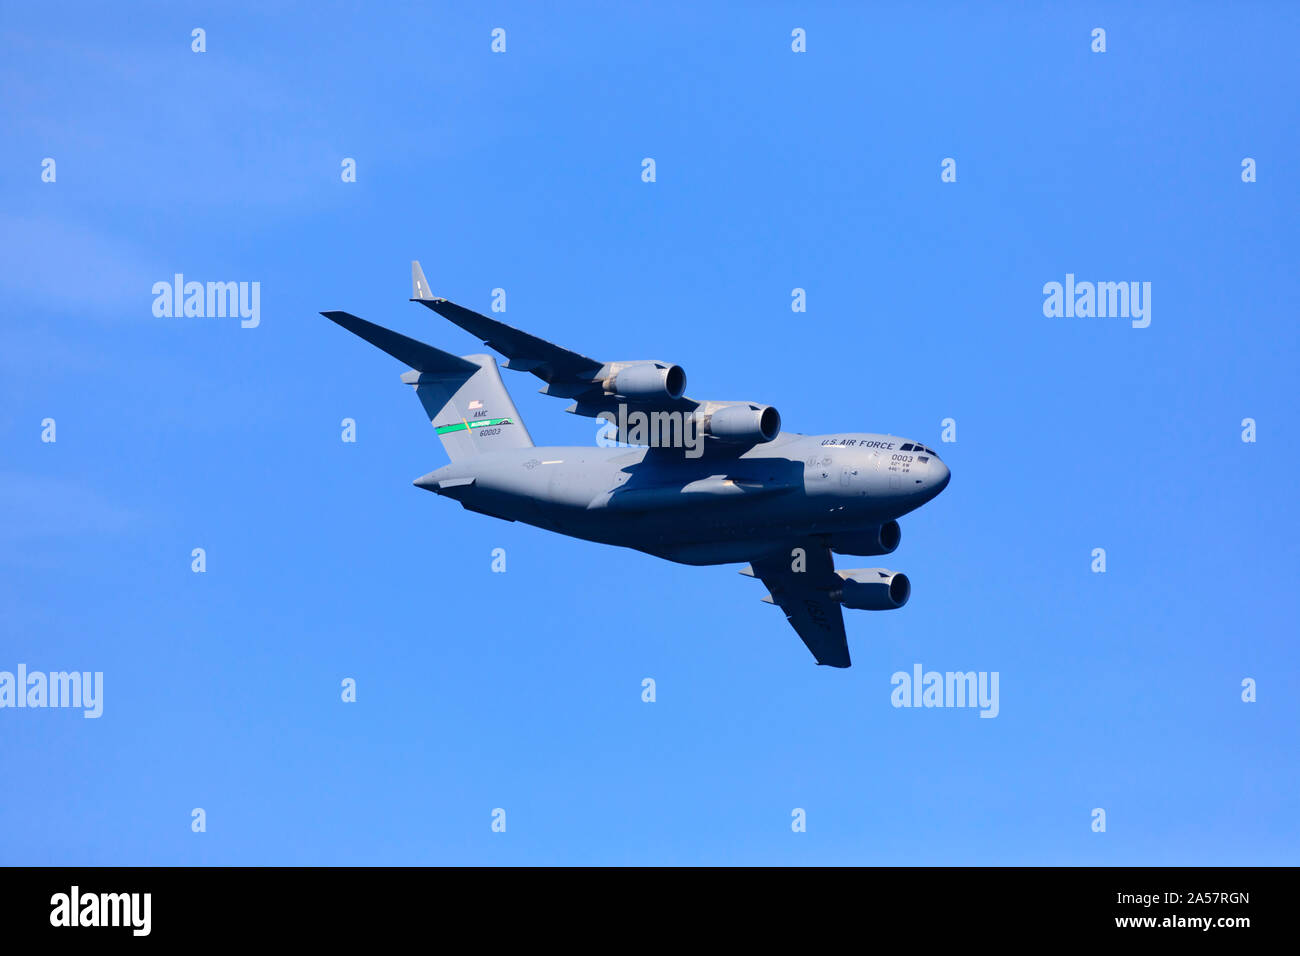 Boeing C17 Globemaster transport aircraft of the United States air force performing a fly past at the 2019 San Fransisco fleet Week. Stock Photo